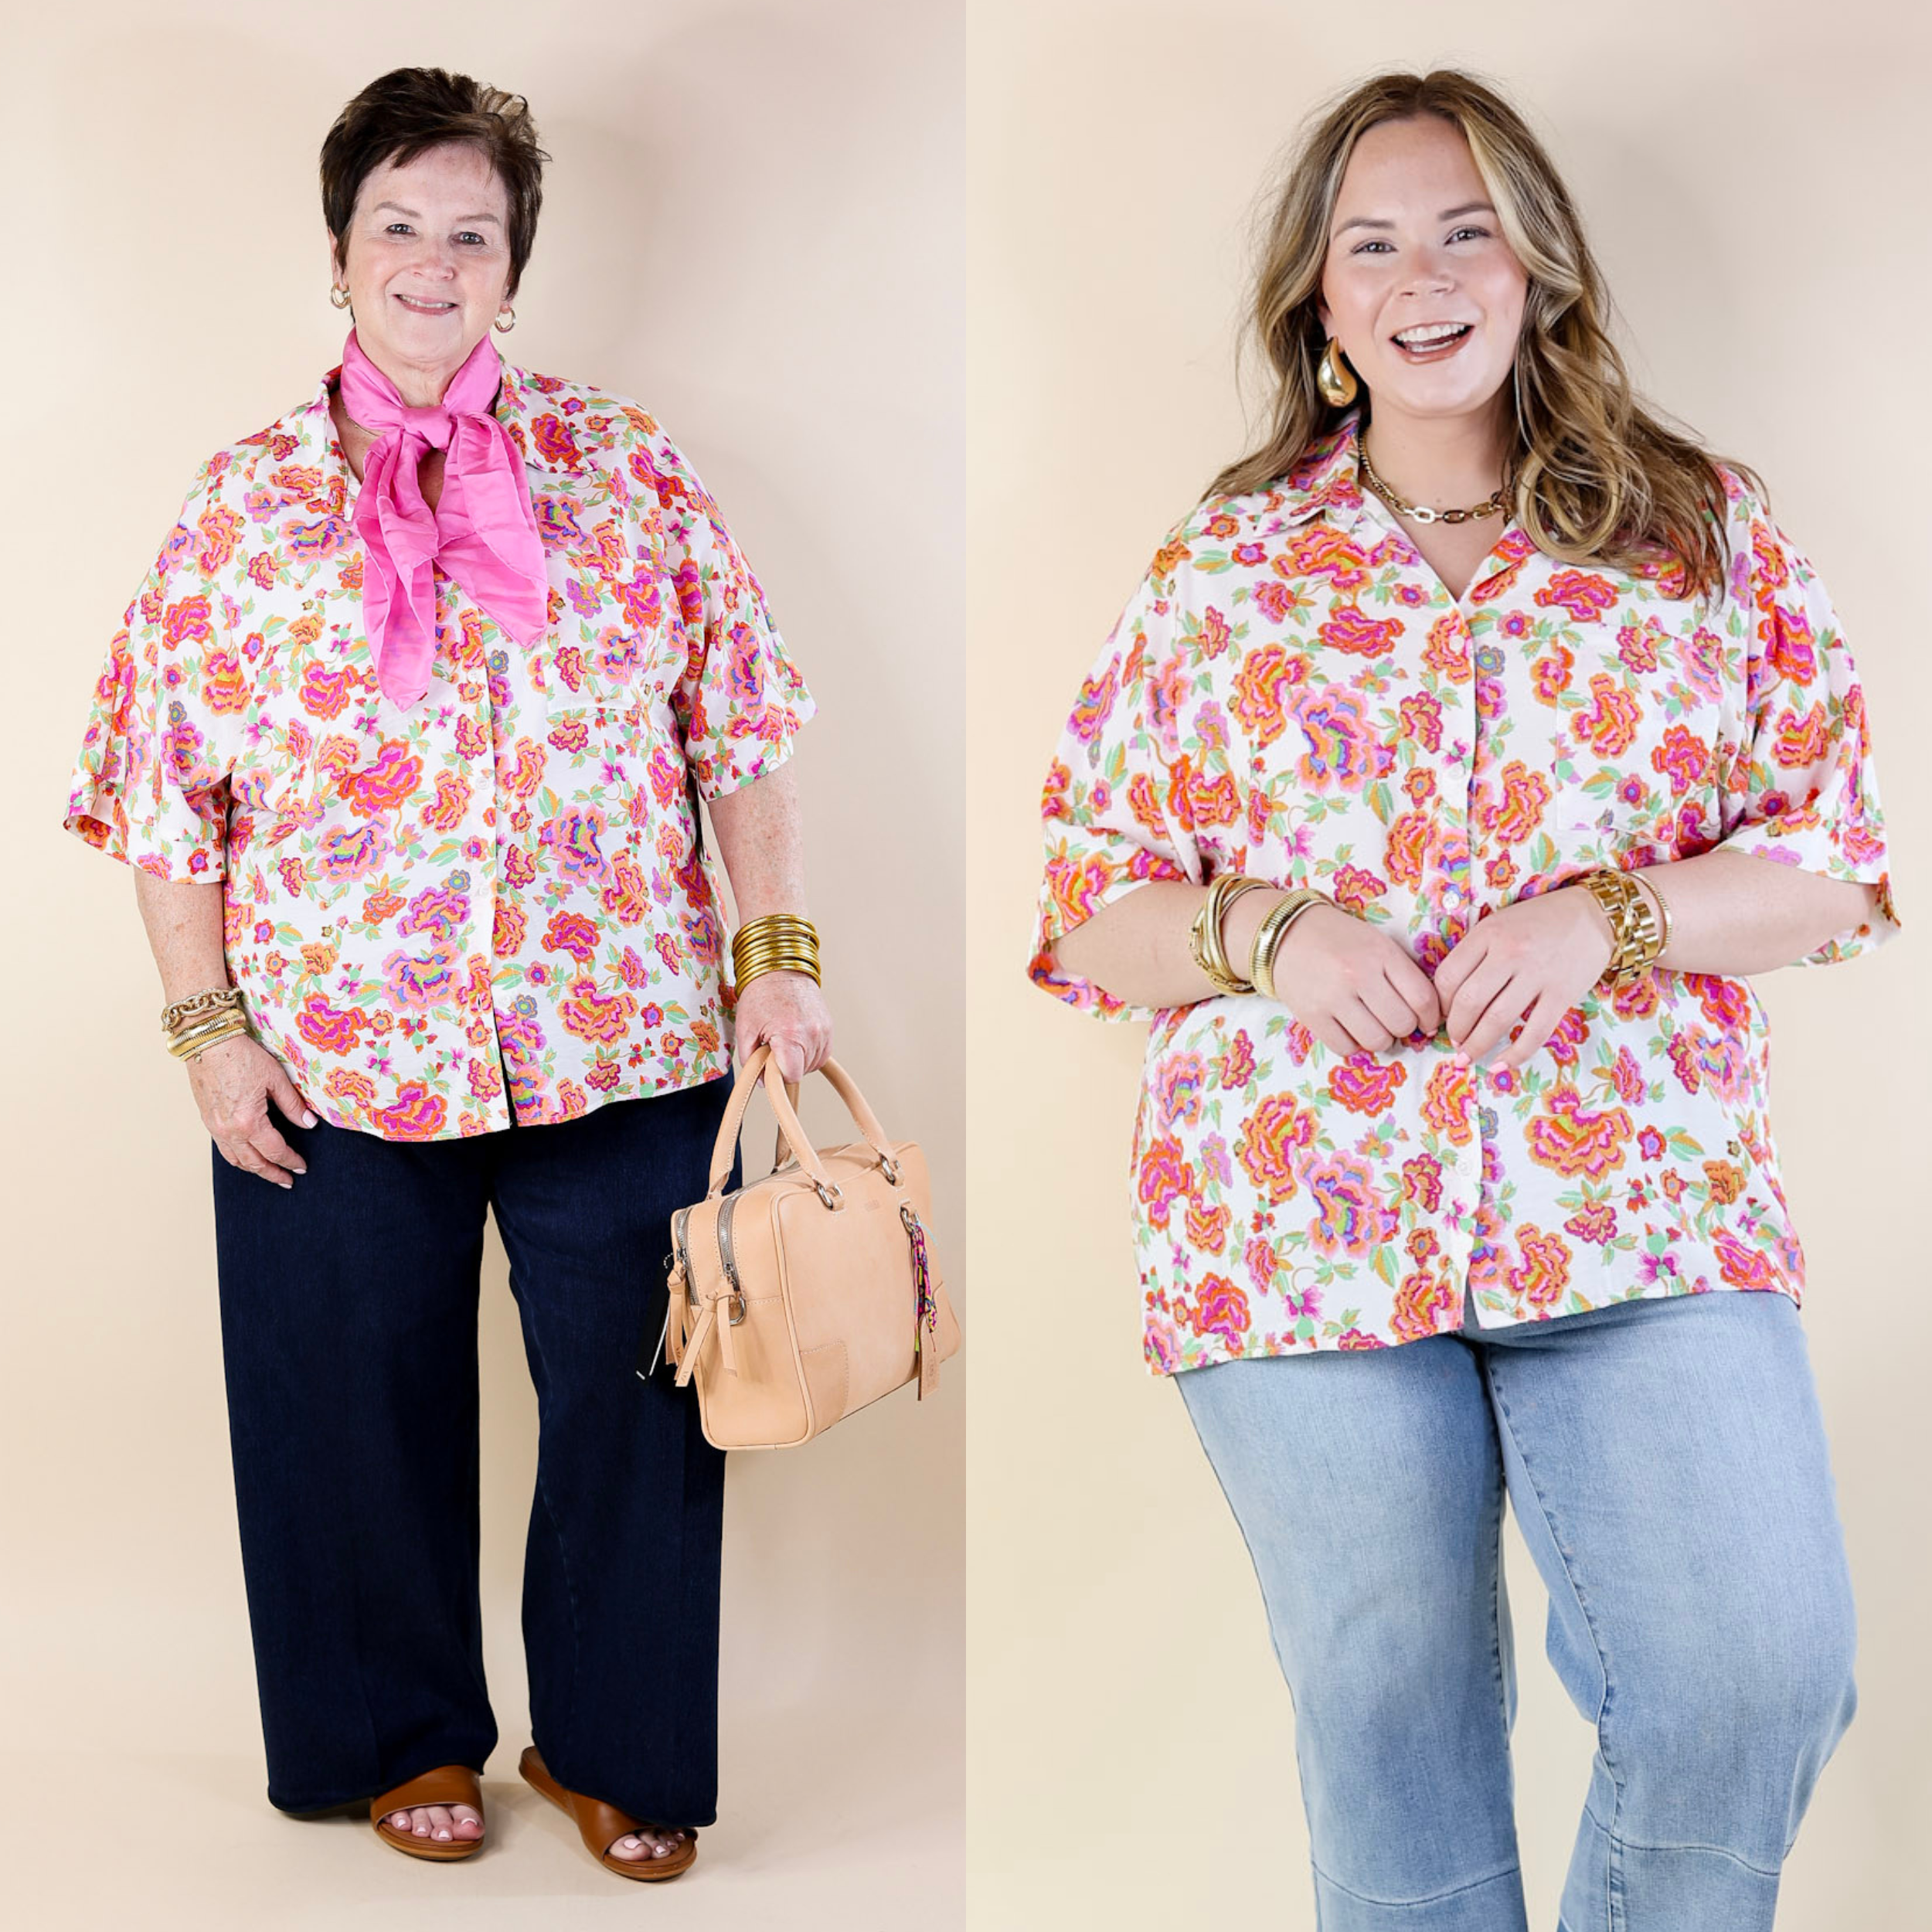 Enchanted Blooms Floral Print Top with Collar in Off White - Giddy Up Glamour Boutique